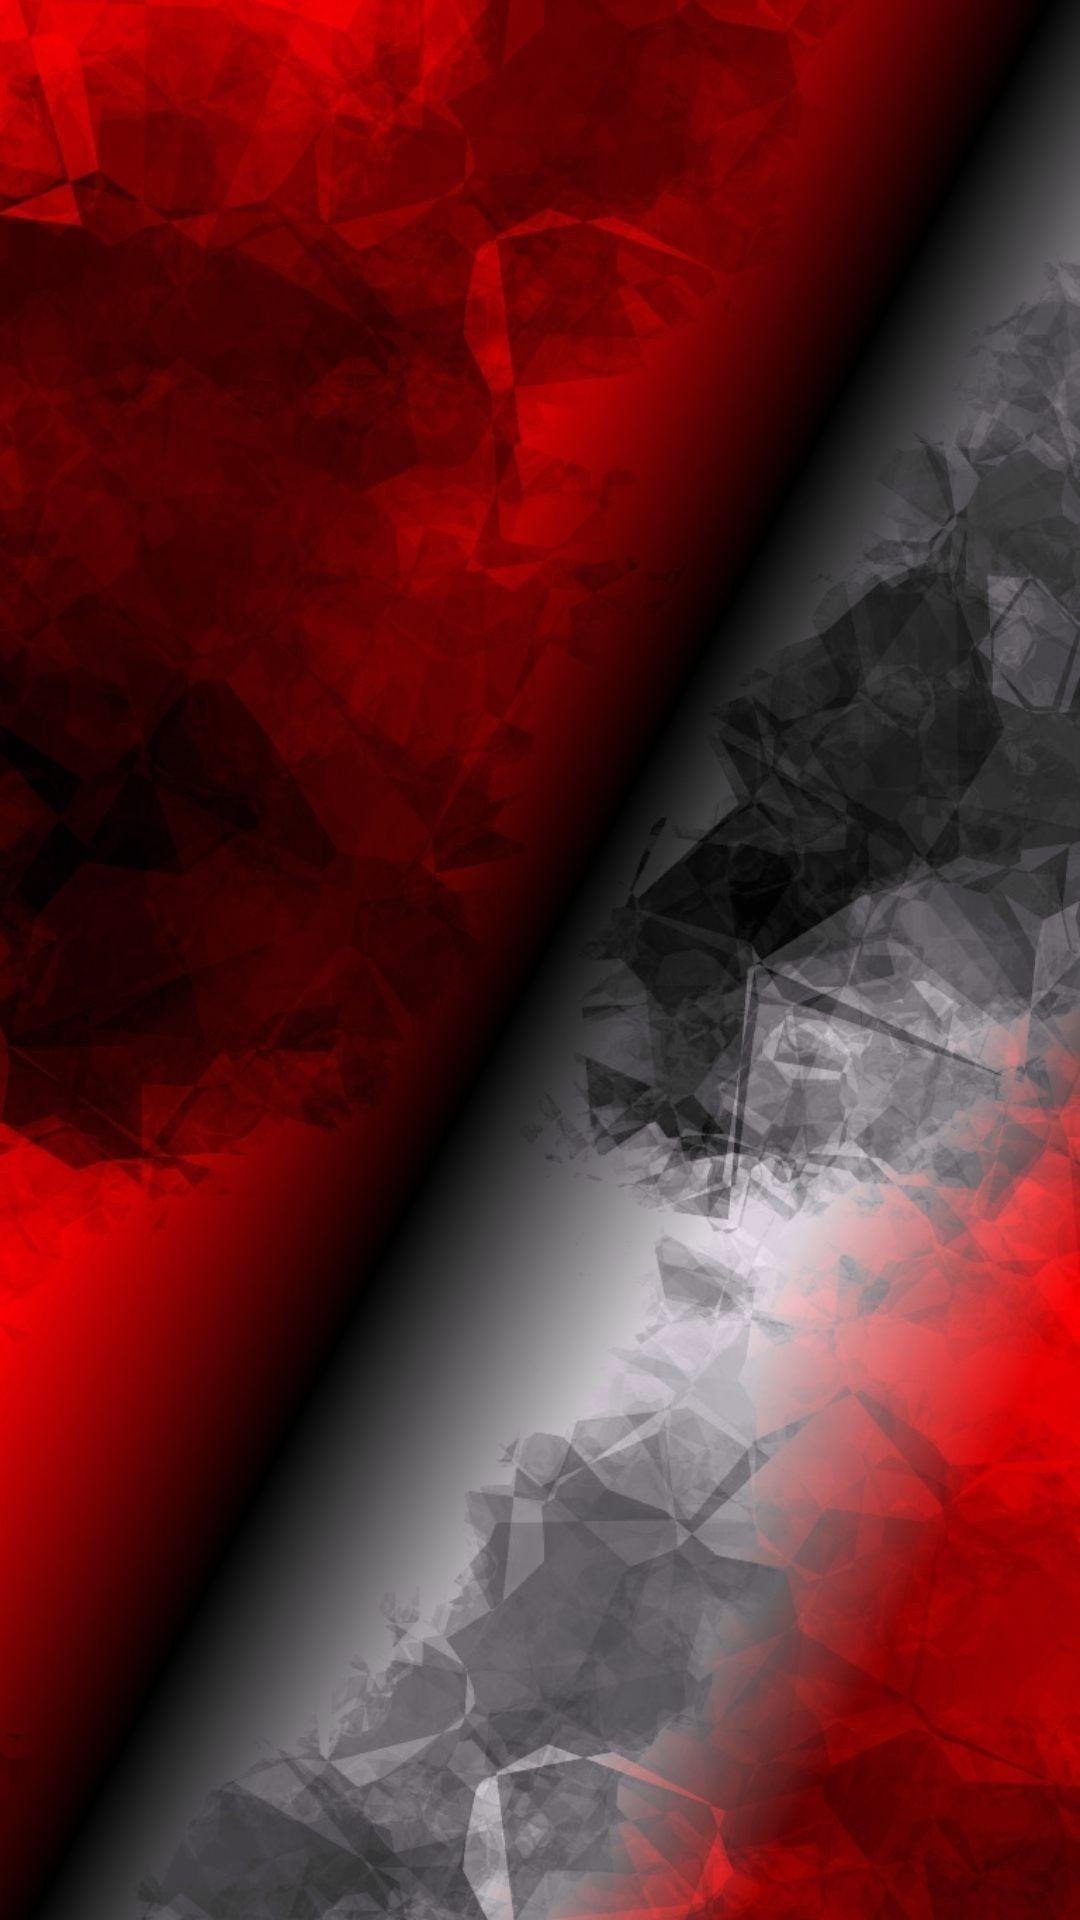 Red and Black iPhone Wallpapers - Top Free Red and Black iPhone